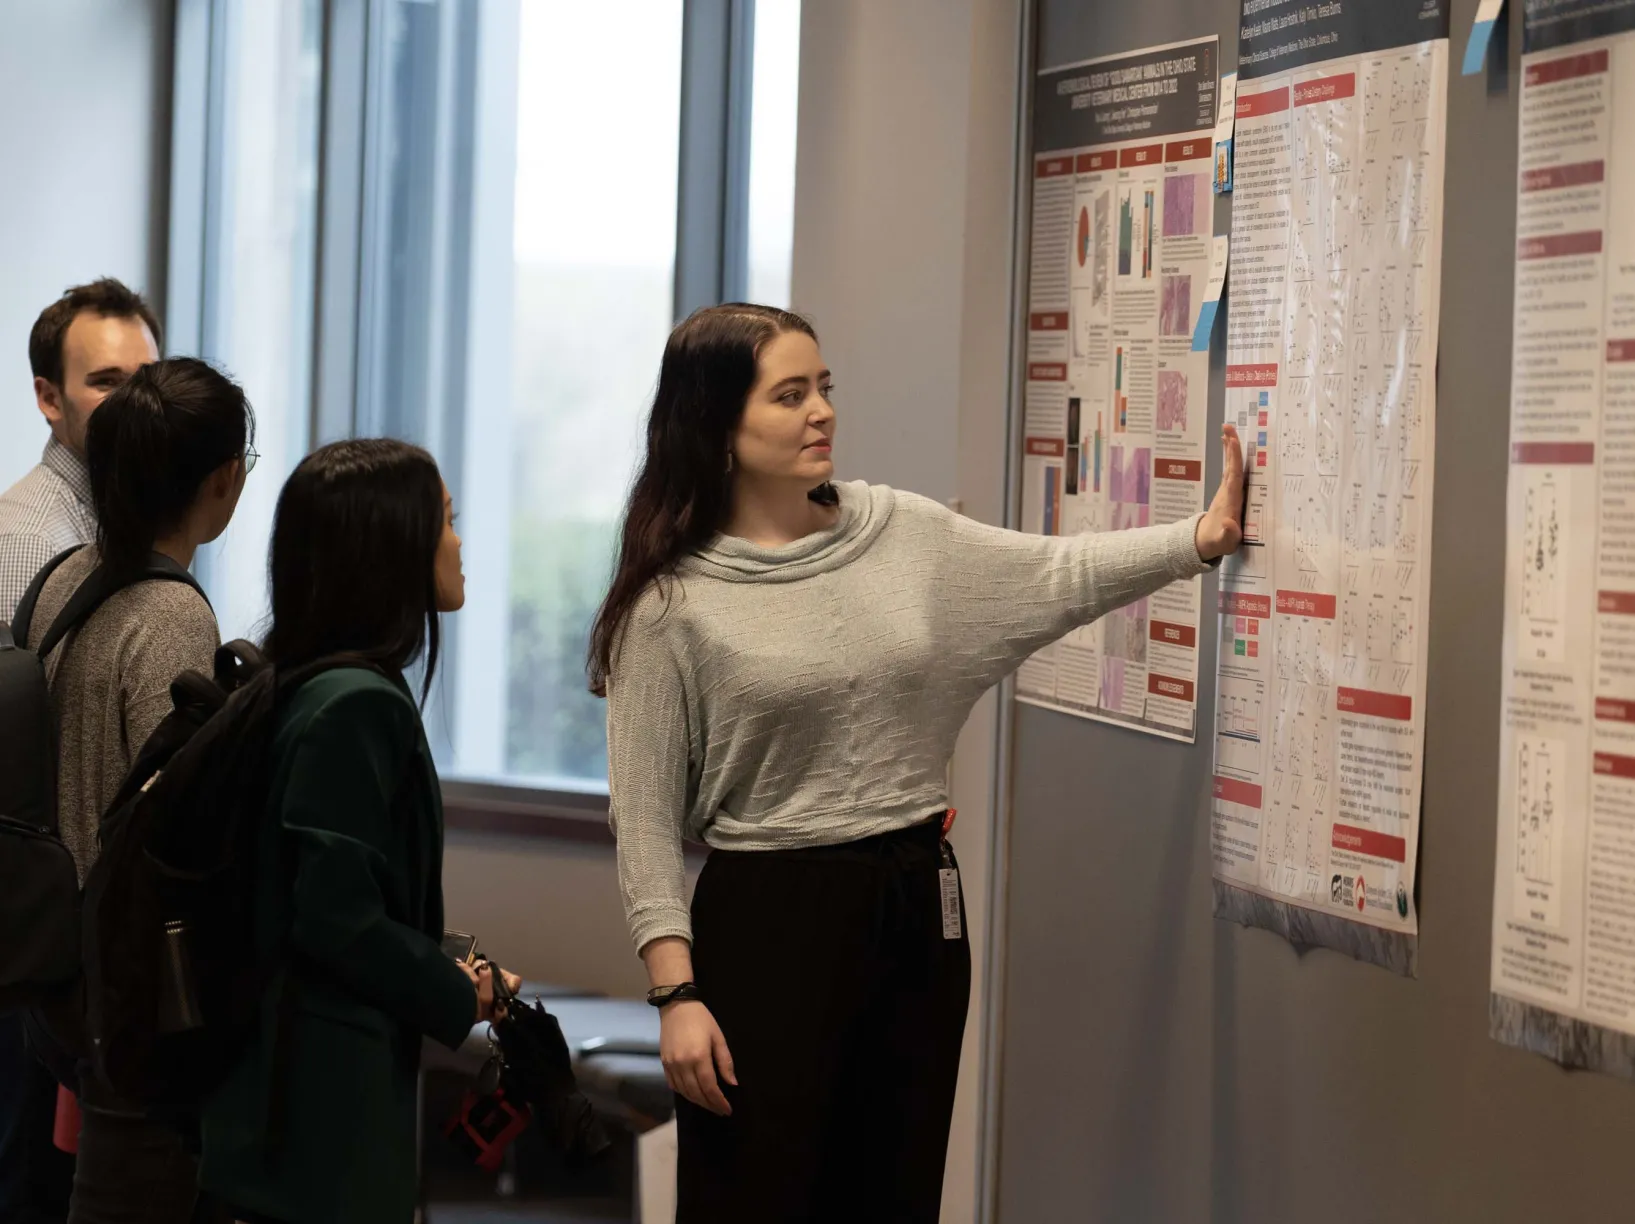 A woman explaining information on some posters to other students